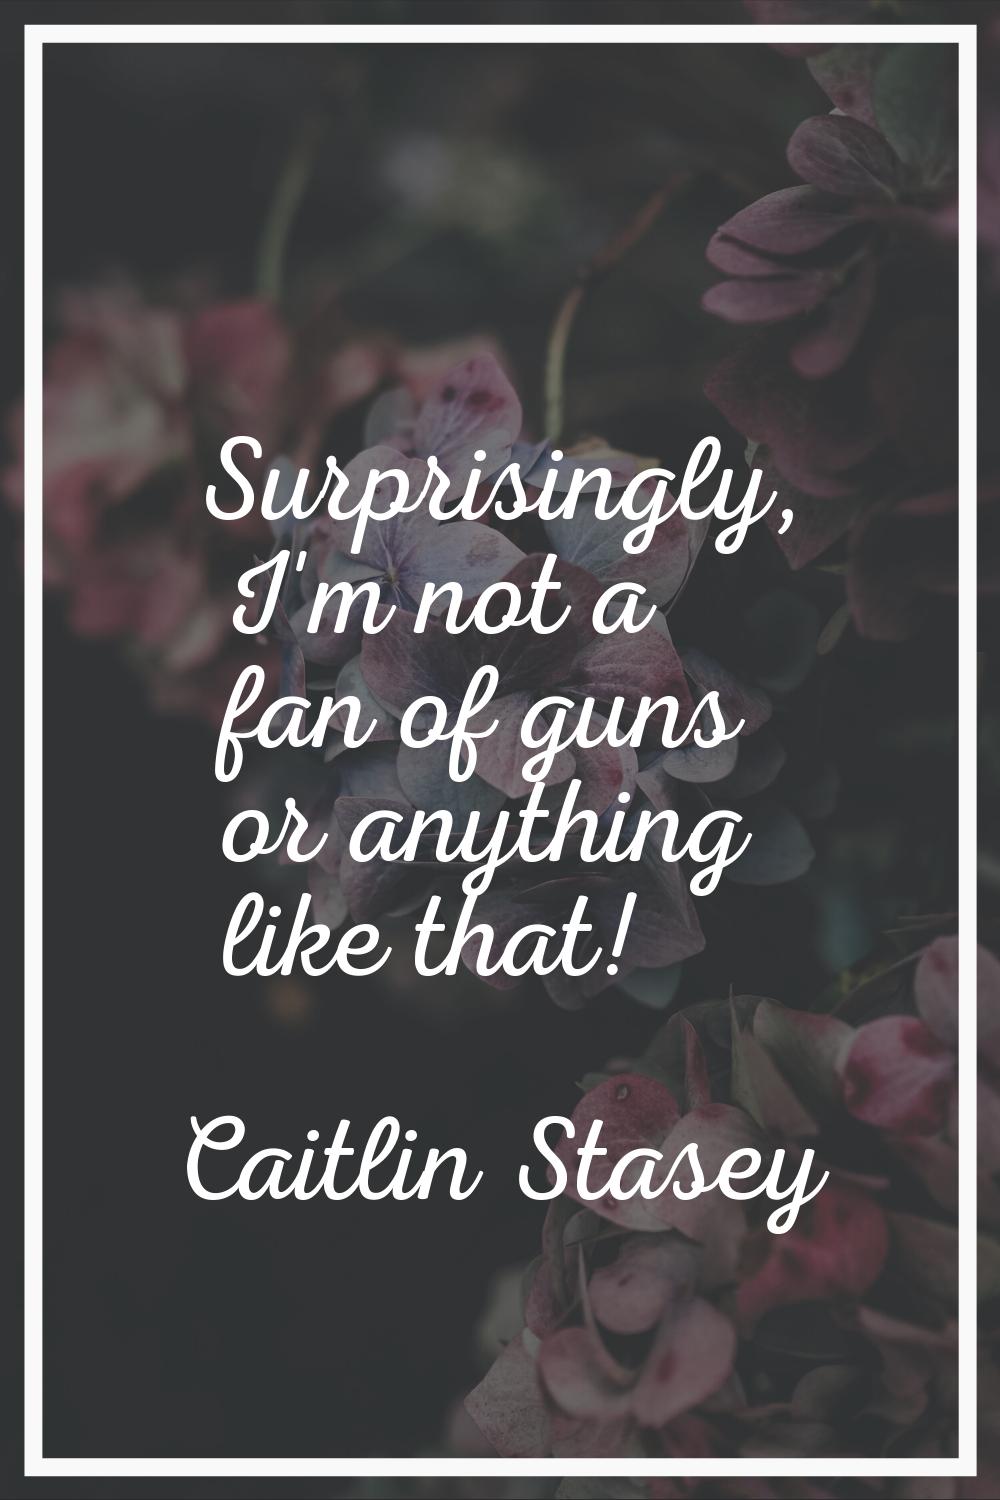 Surprisingly, I'm not a fan of guns or anything like that!